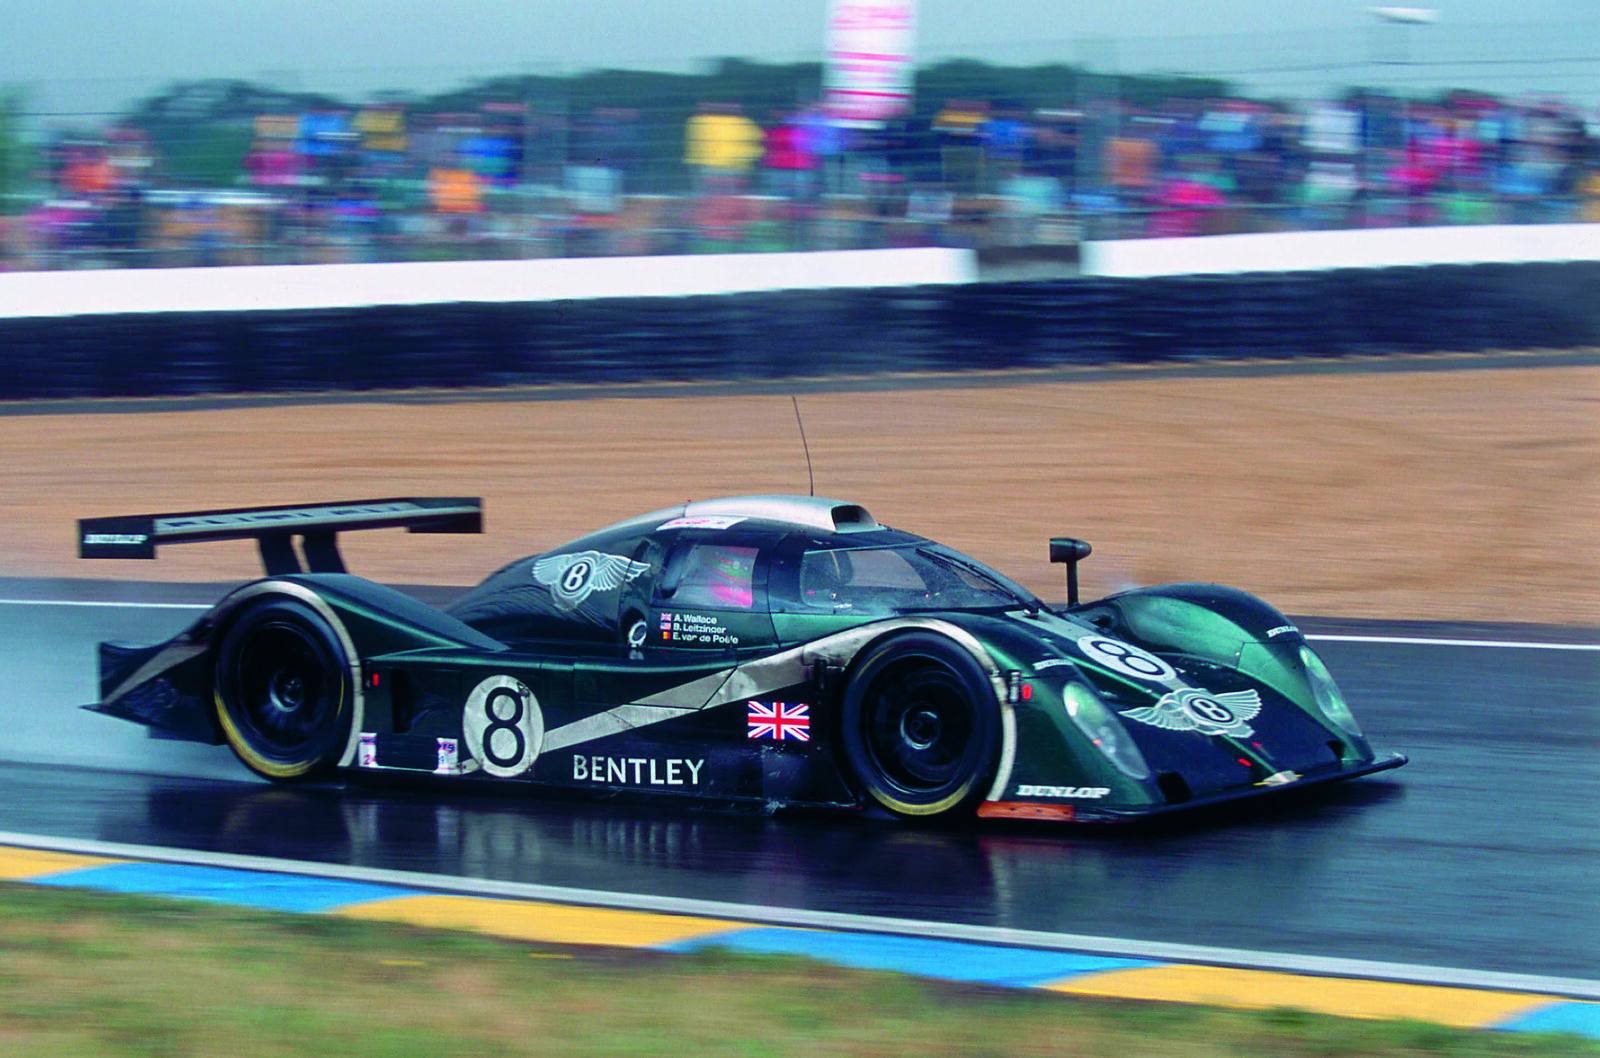 EXP Speed 8 in Le Mans